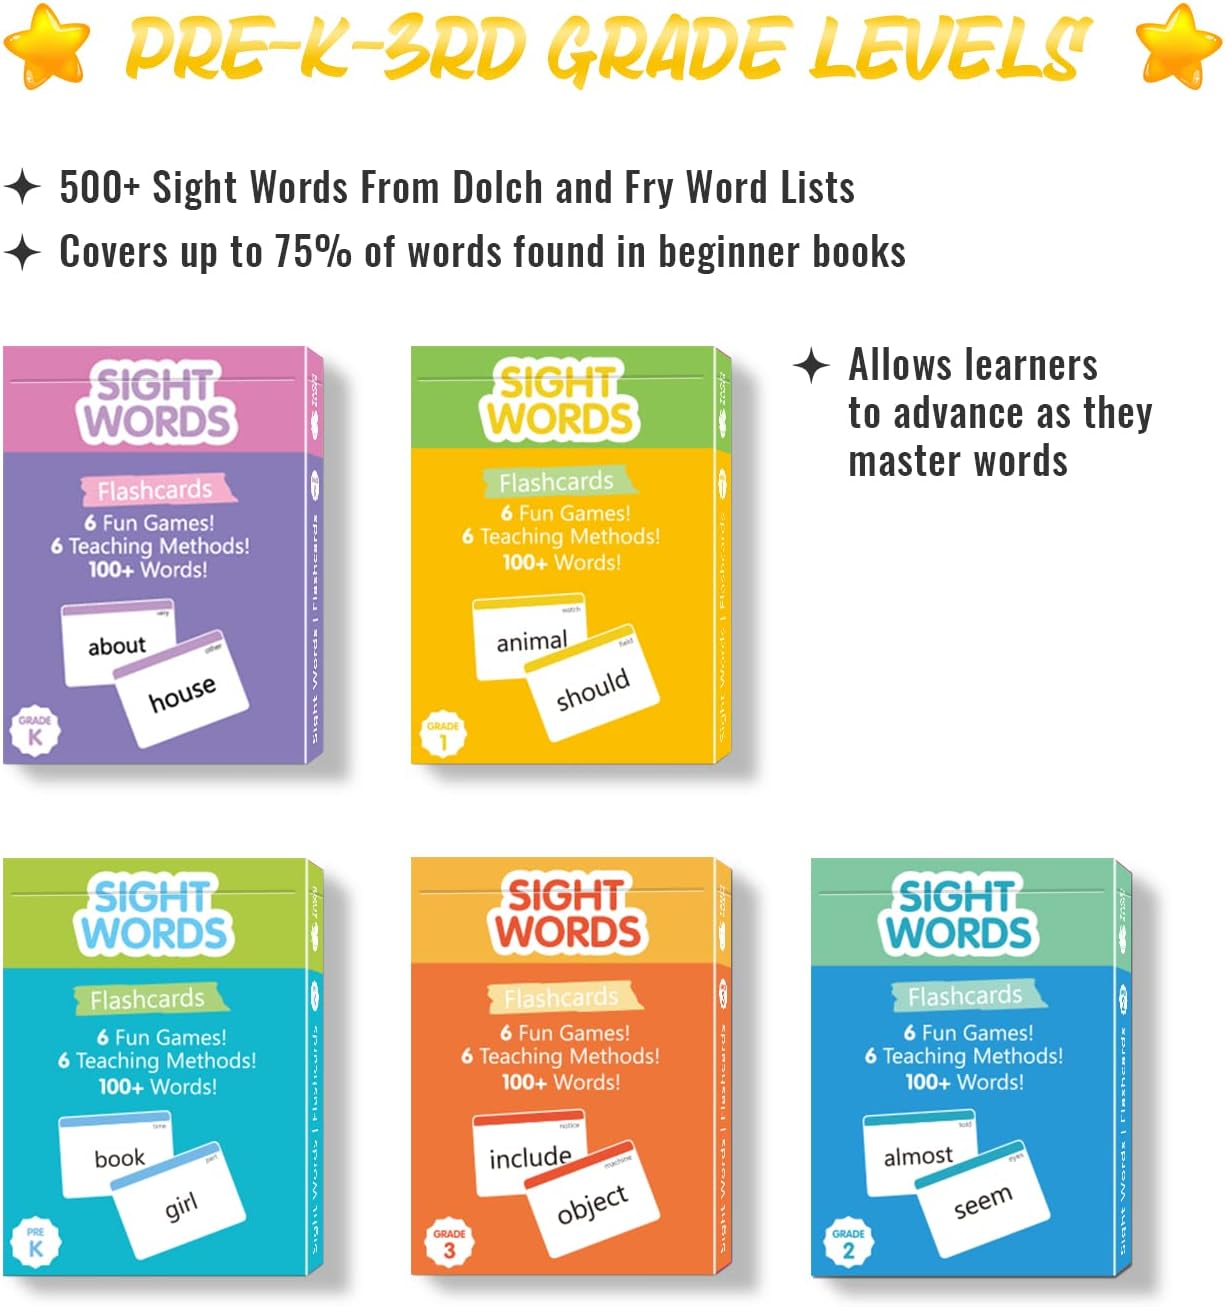 Flash Cards - 520 Sight Words for Preschool (Pre K), Kindergarten, 1st, 2nd, 3rd Grade, Educational Alphabet Phonics Learning English Beginners Autism Talking, Dolch Fry Word List Games